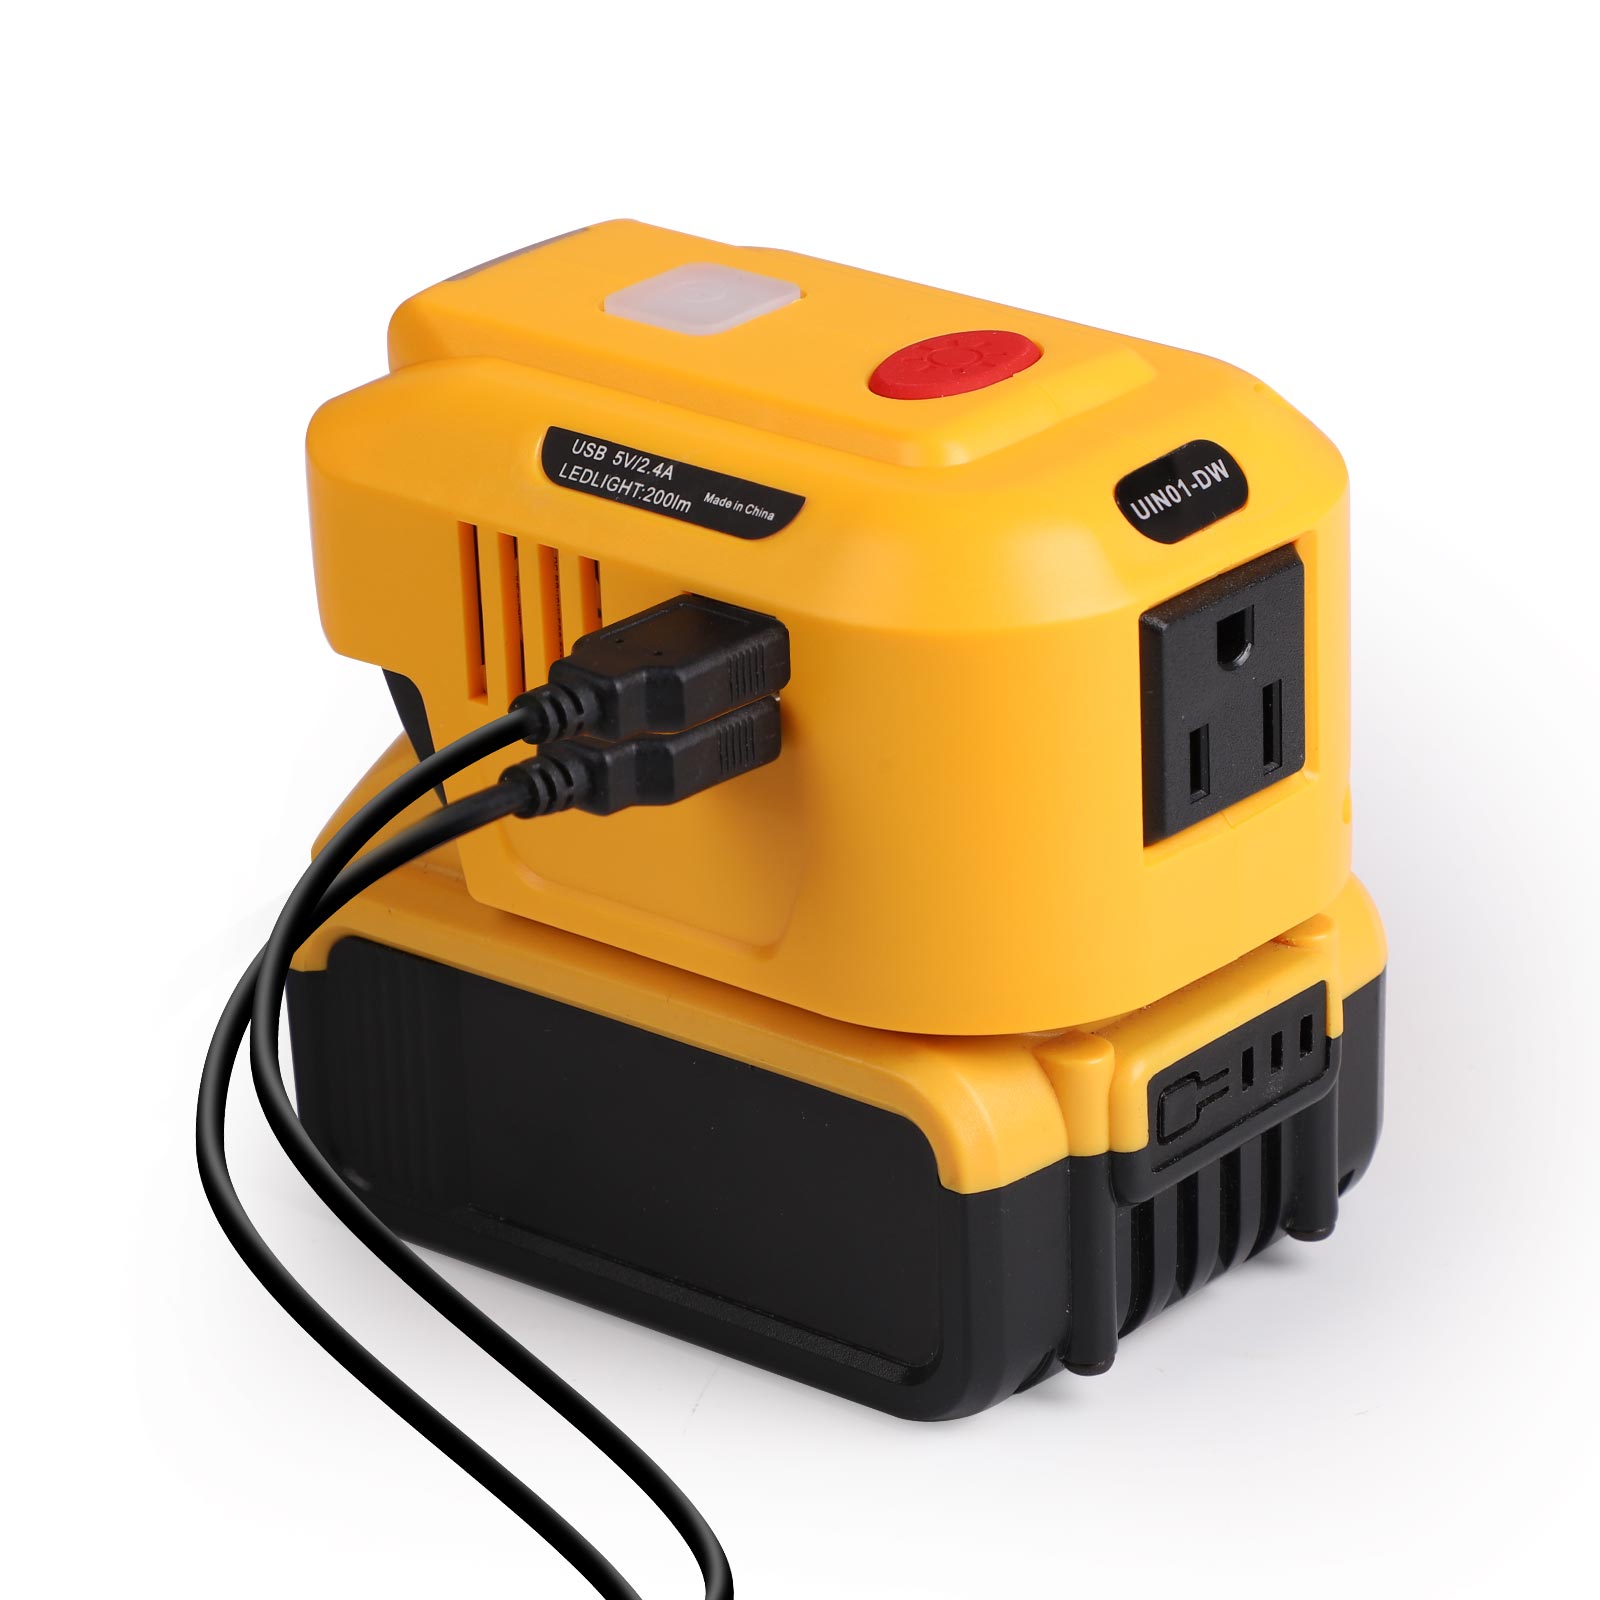 New Battery Adapter for Jigsaw Tools: A Game-Changer for Woodworkers